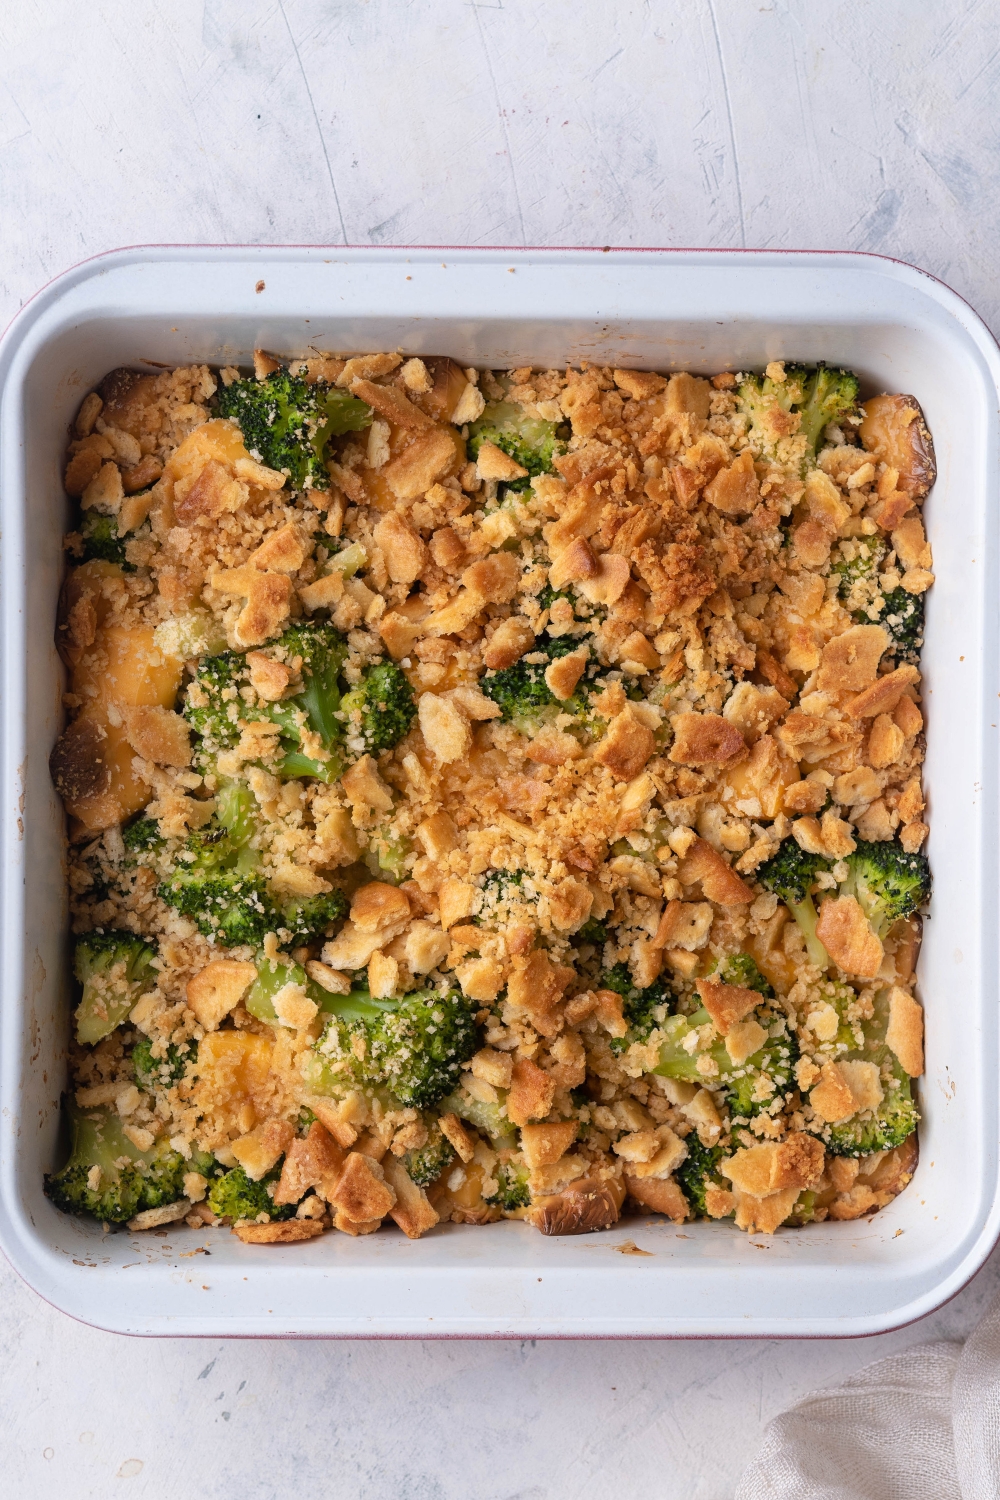 An overhead view of a casserole dish with cooked broccoli cheese casserole.